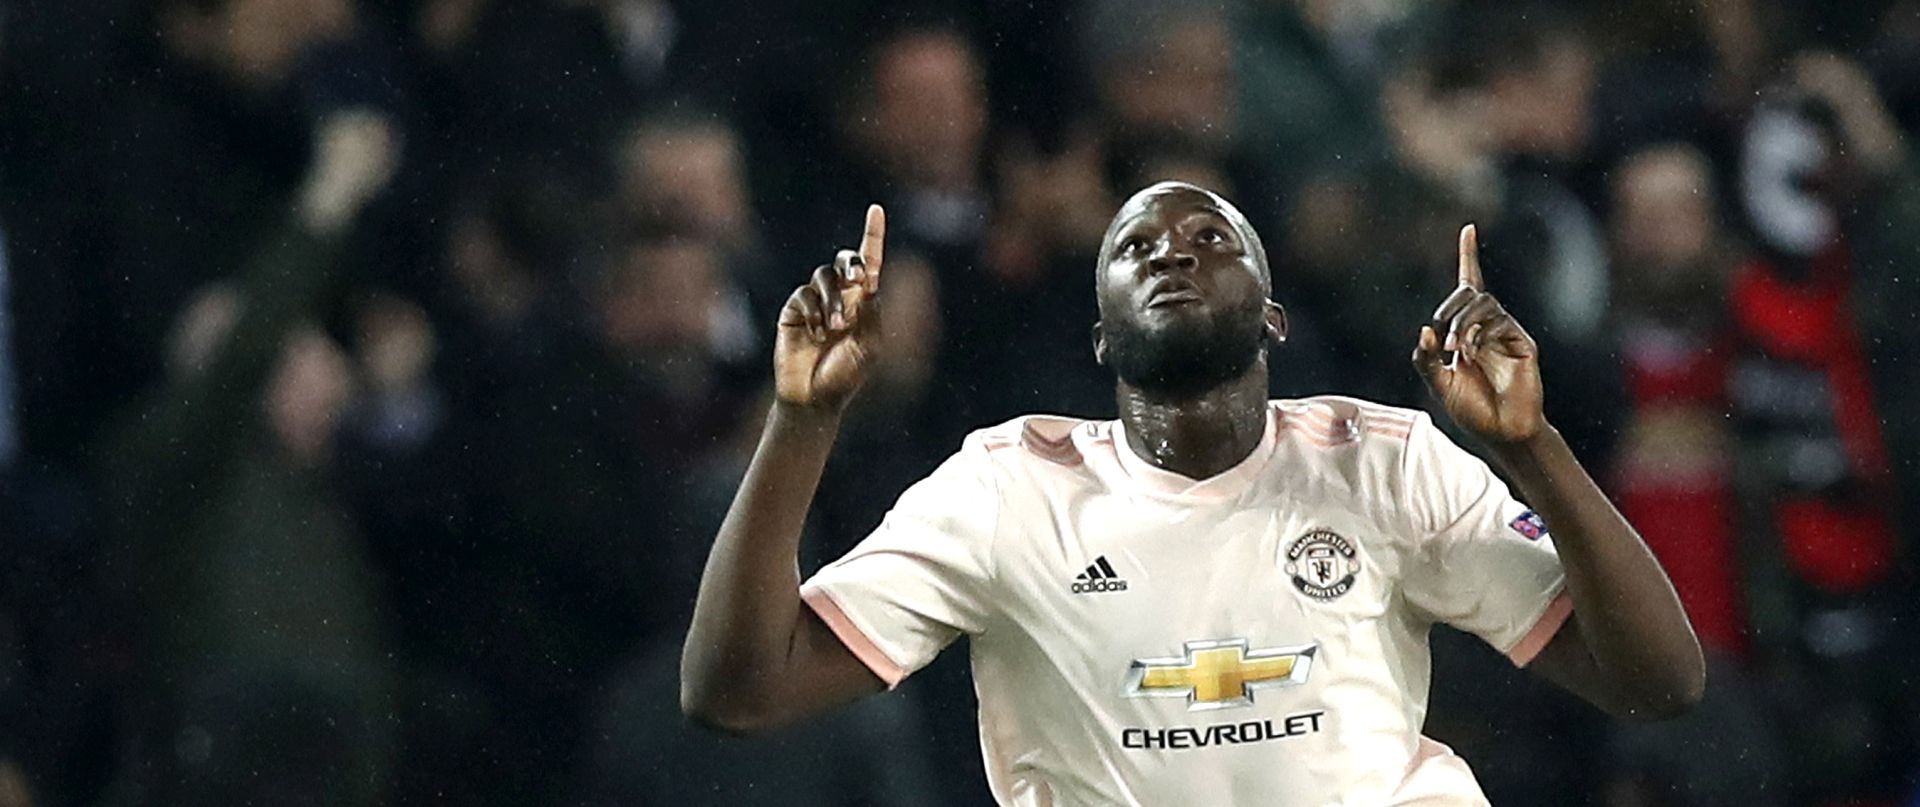 epa07418143 Romelu Lukaku of Manchester United celebrates after scoring the 2-1 lead during the UEFA Champions League round of 16 second leg soccer match between PSG and Manchester United at the Parc des Princes Stadium in Paris, France, 06 March 2019.  EPA/IAN LANGSDON